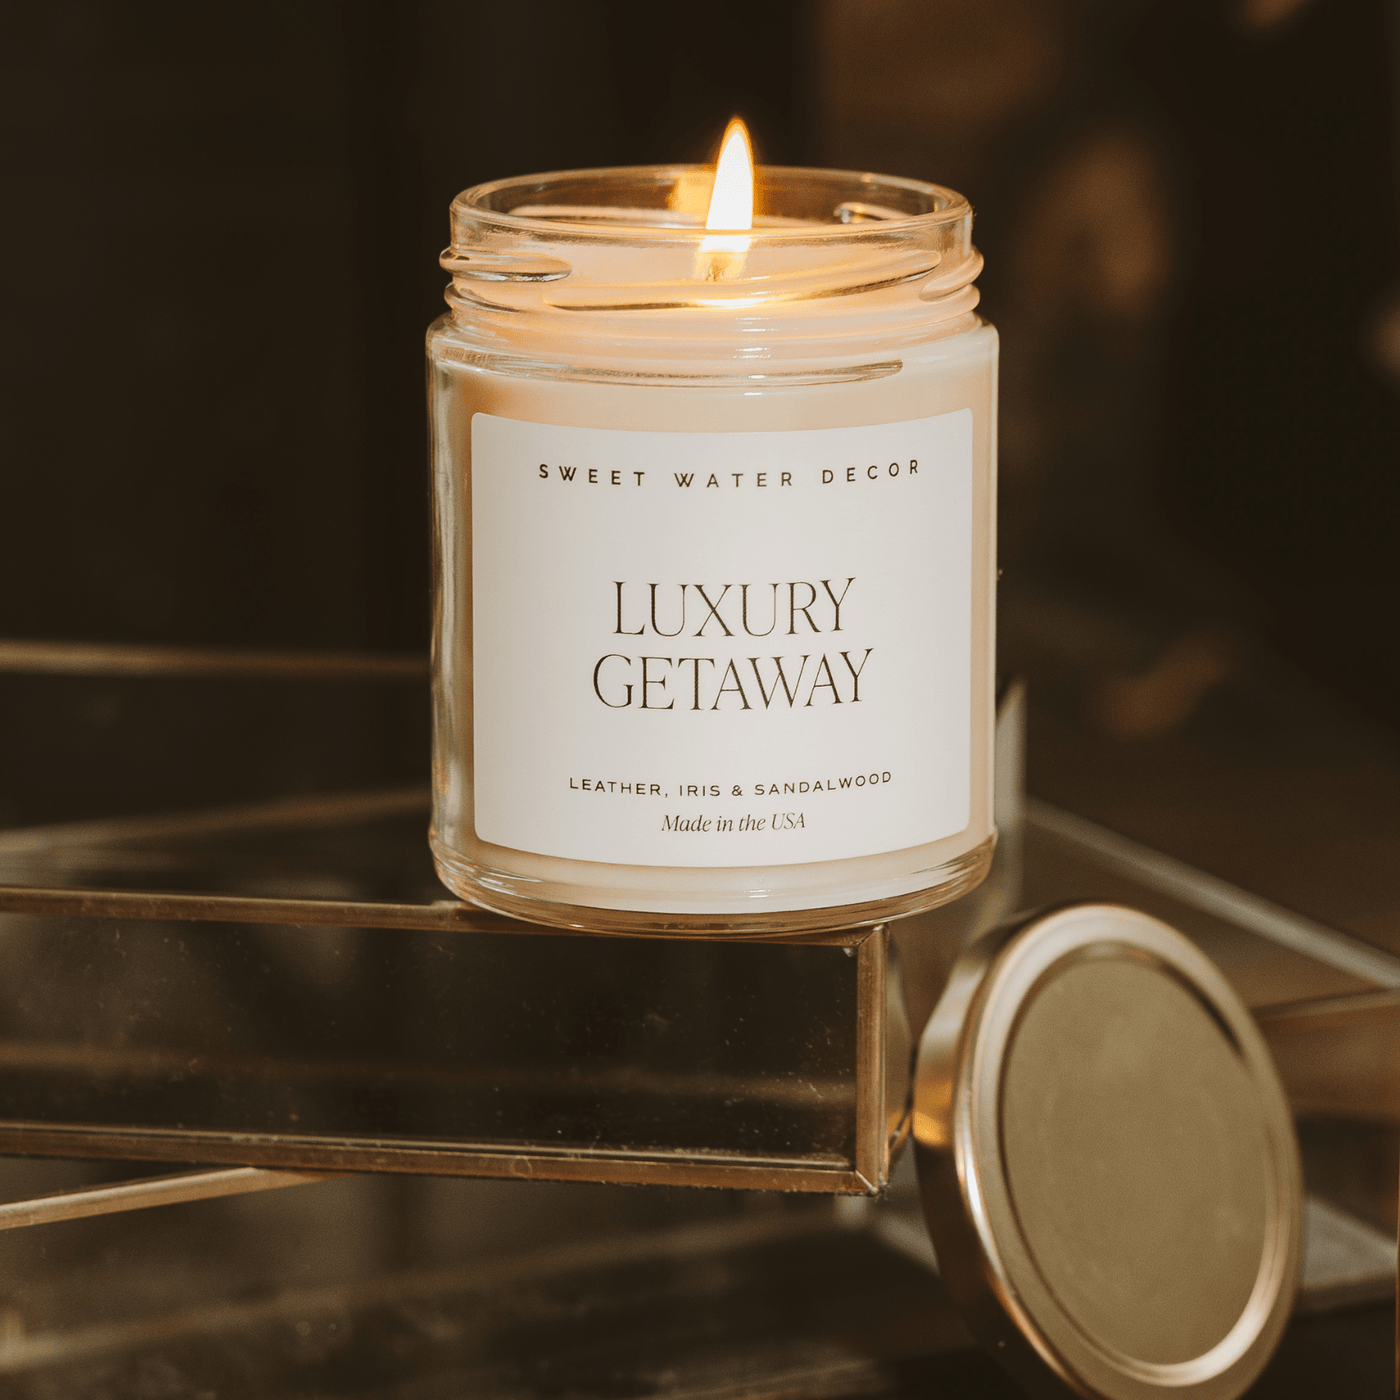 Luxury Getaway Soy Candle - Clear Jar - 9 oz - Sweet Water Decor - Candles